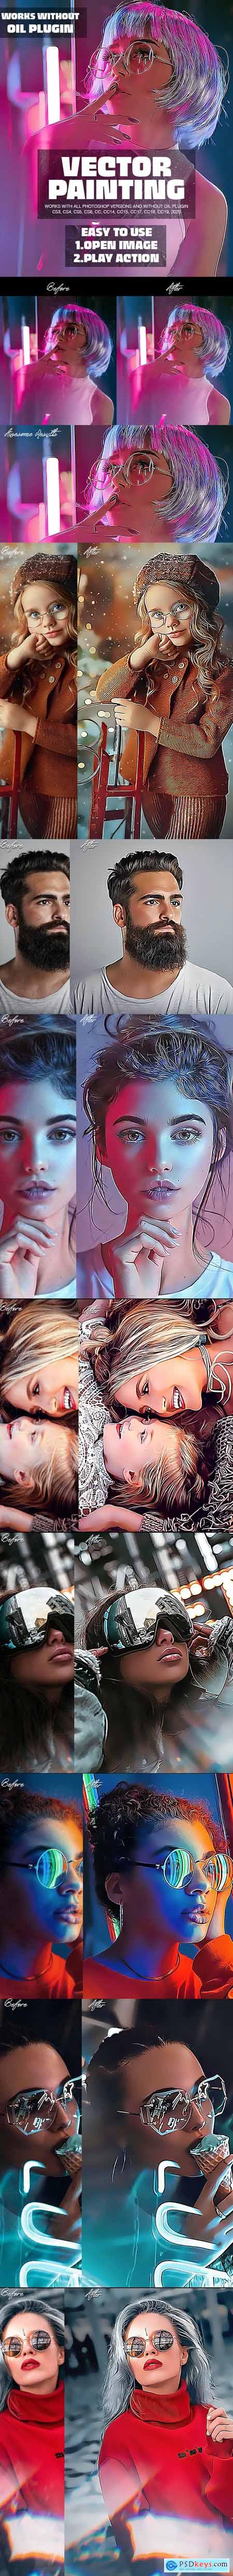 Vector Painting Photoshop Action 26527521